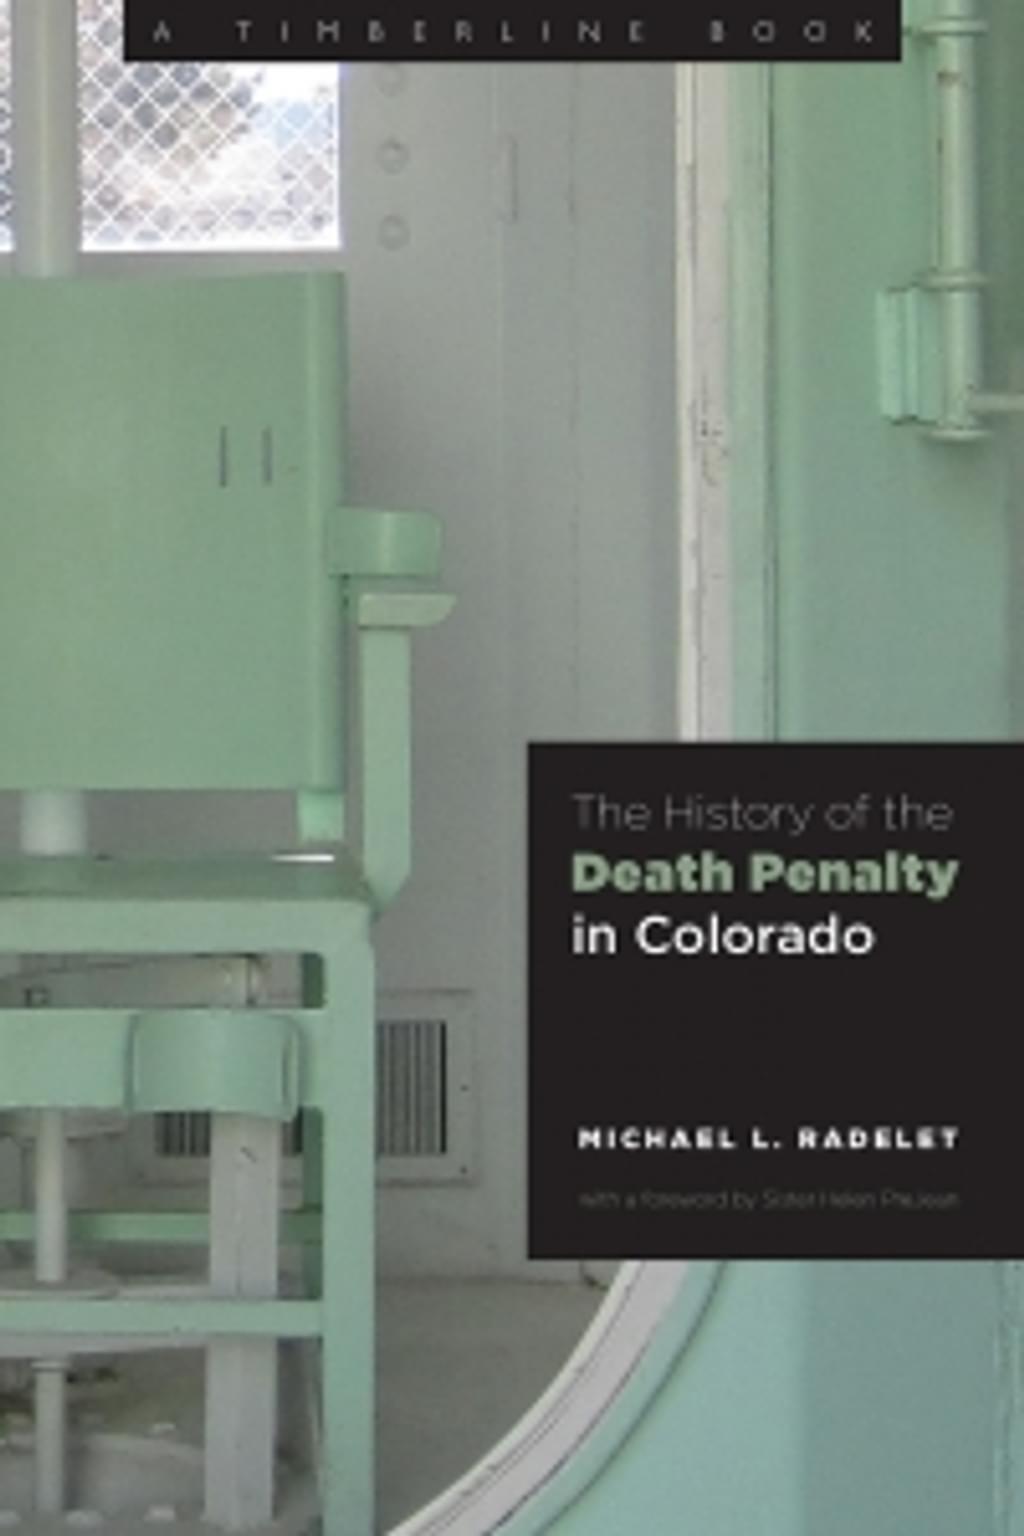 BOOKS: "The History of the Death Penalty in Colorado"